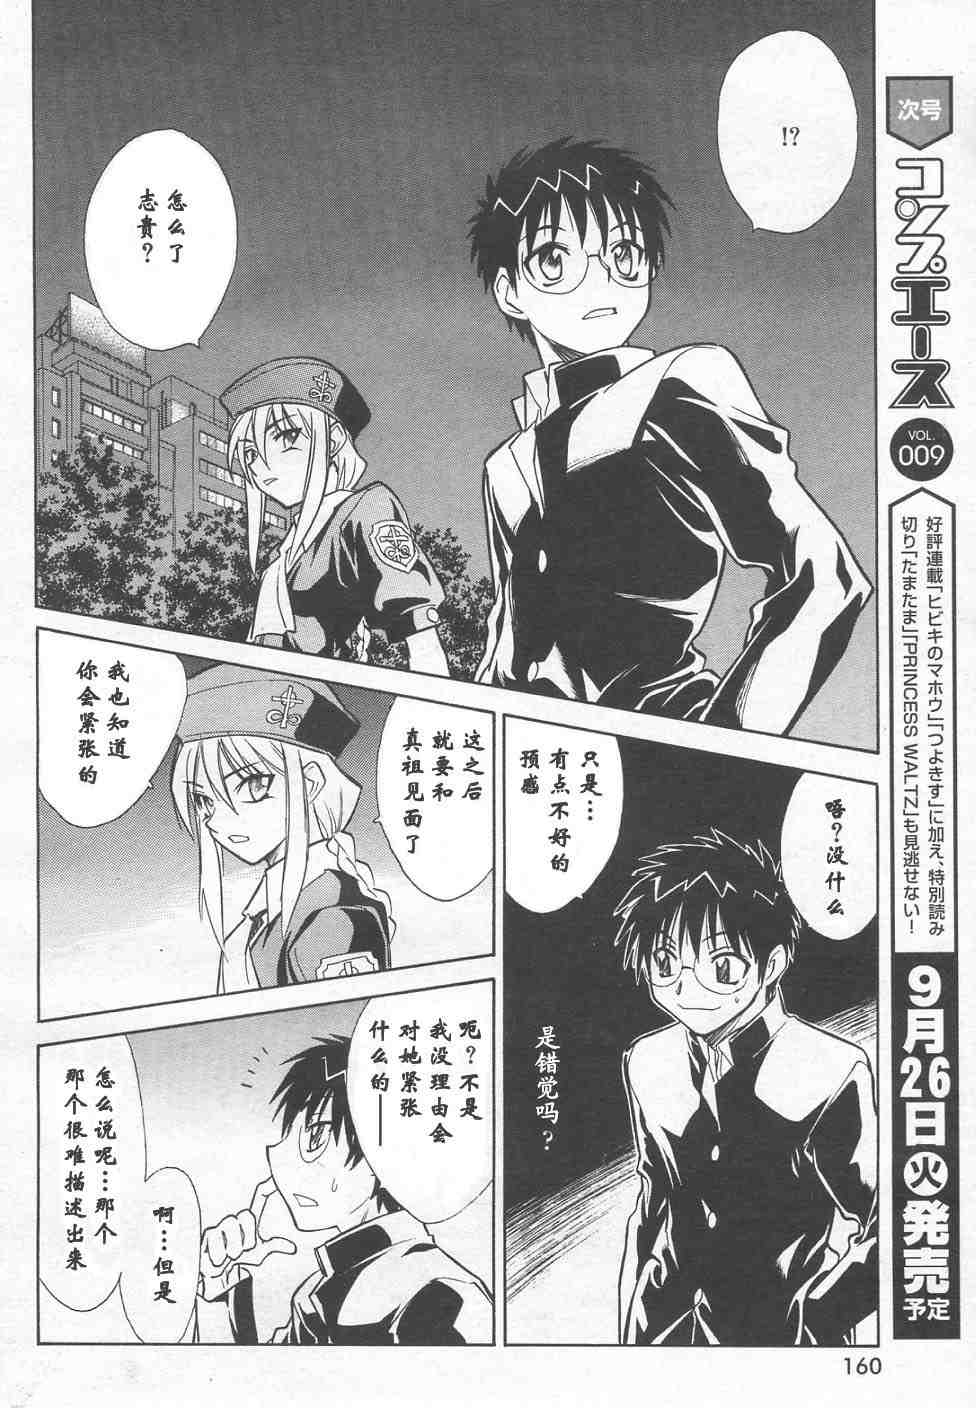 《Melty Blood》漫画 ch_07